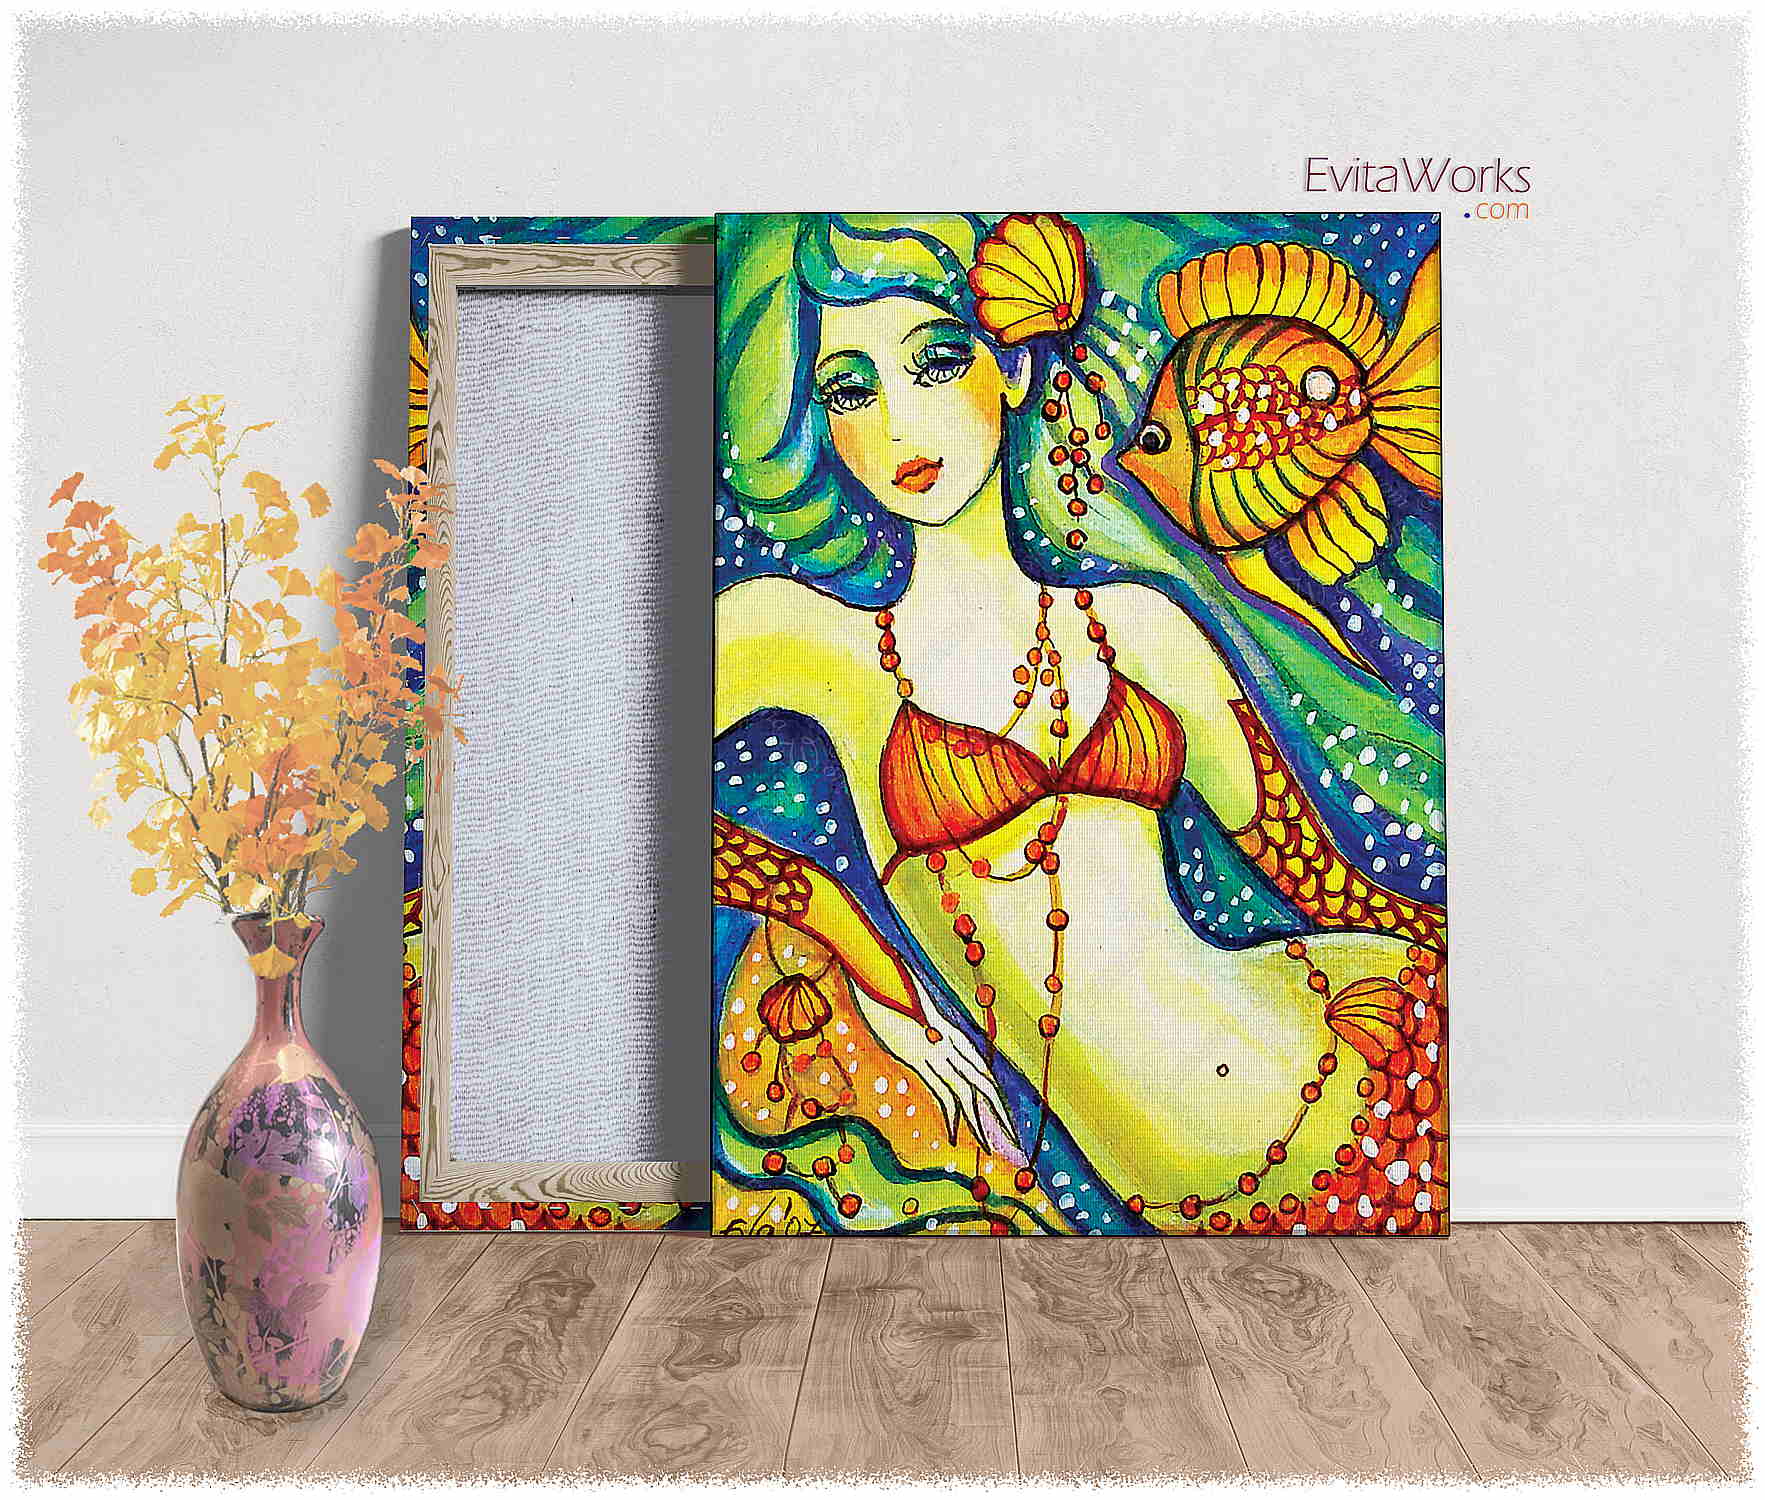 Hit to learn about "Mermaid 47, beautiful female creature" on canvases